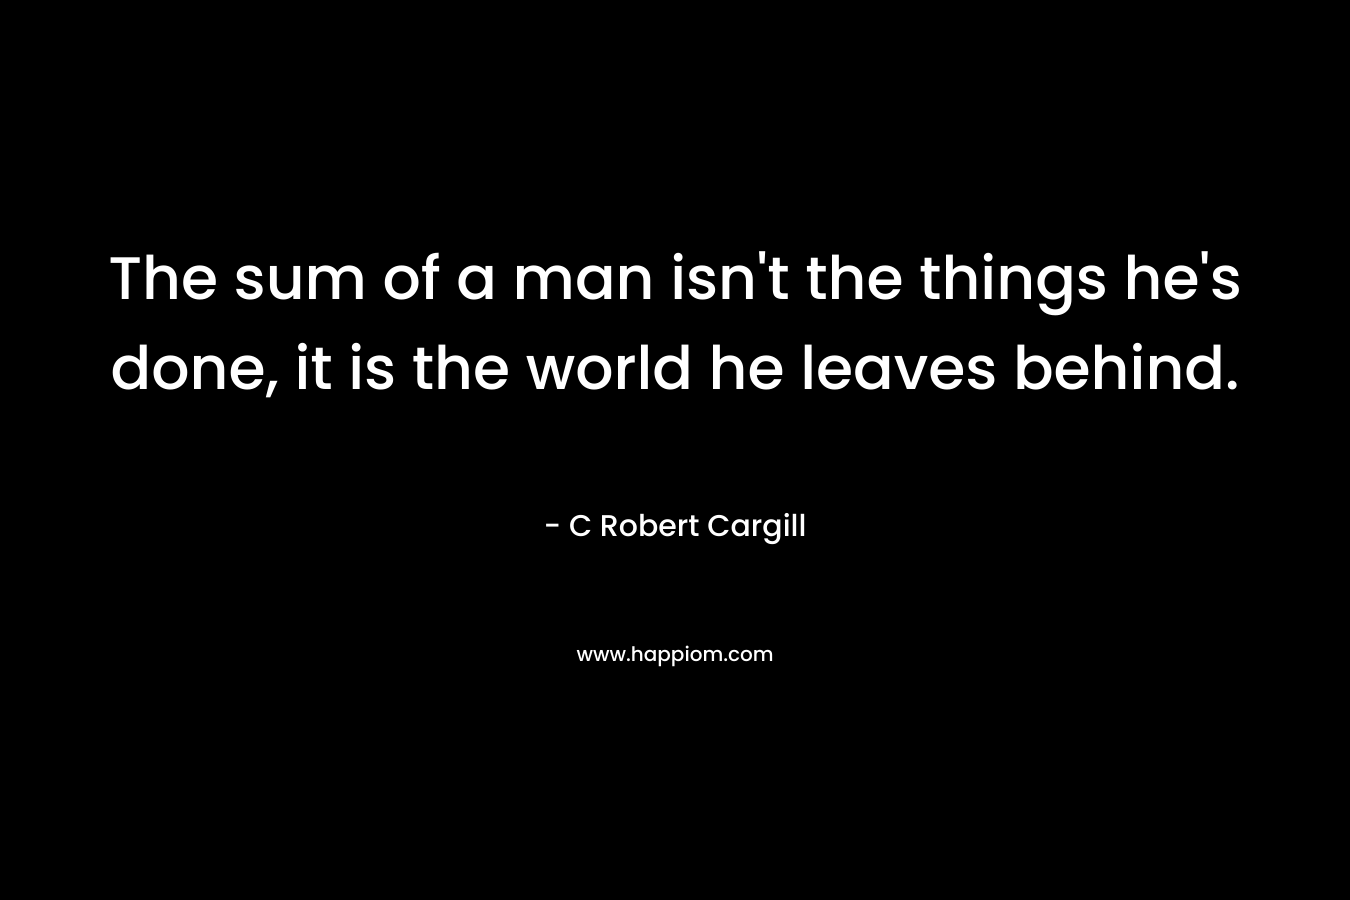 The sum of a man isn't the things he's done, it is the world he leaves behind.